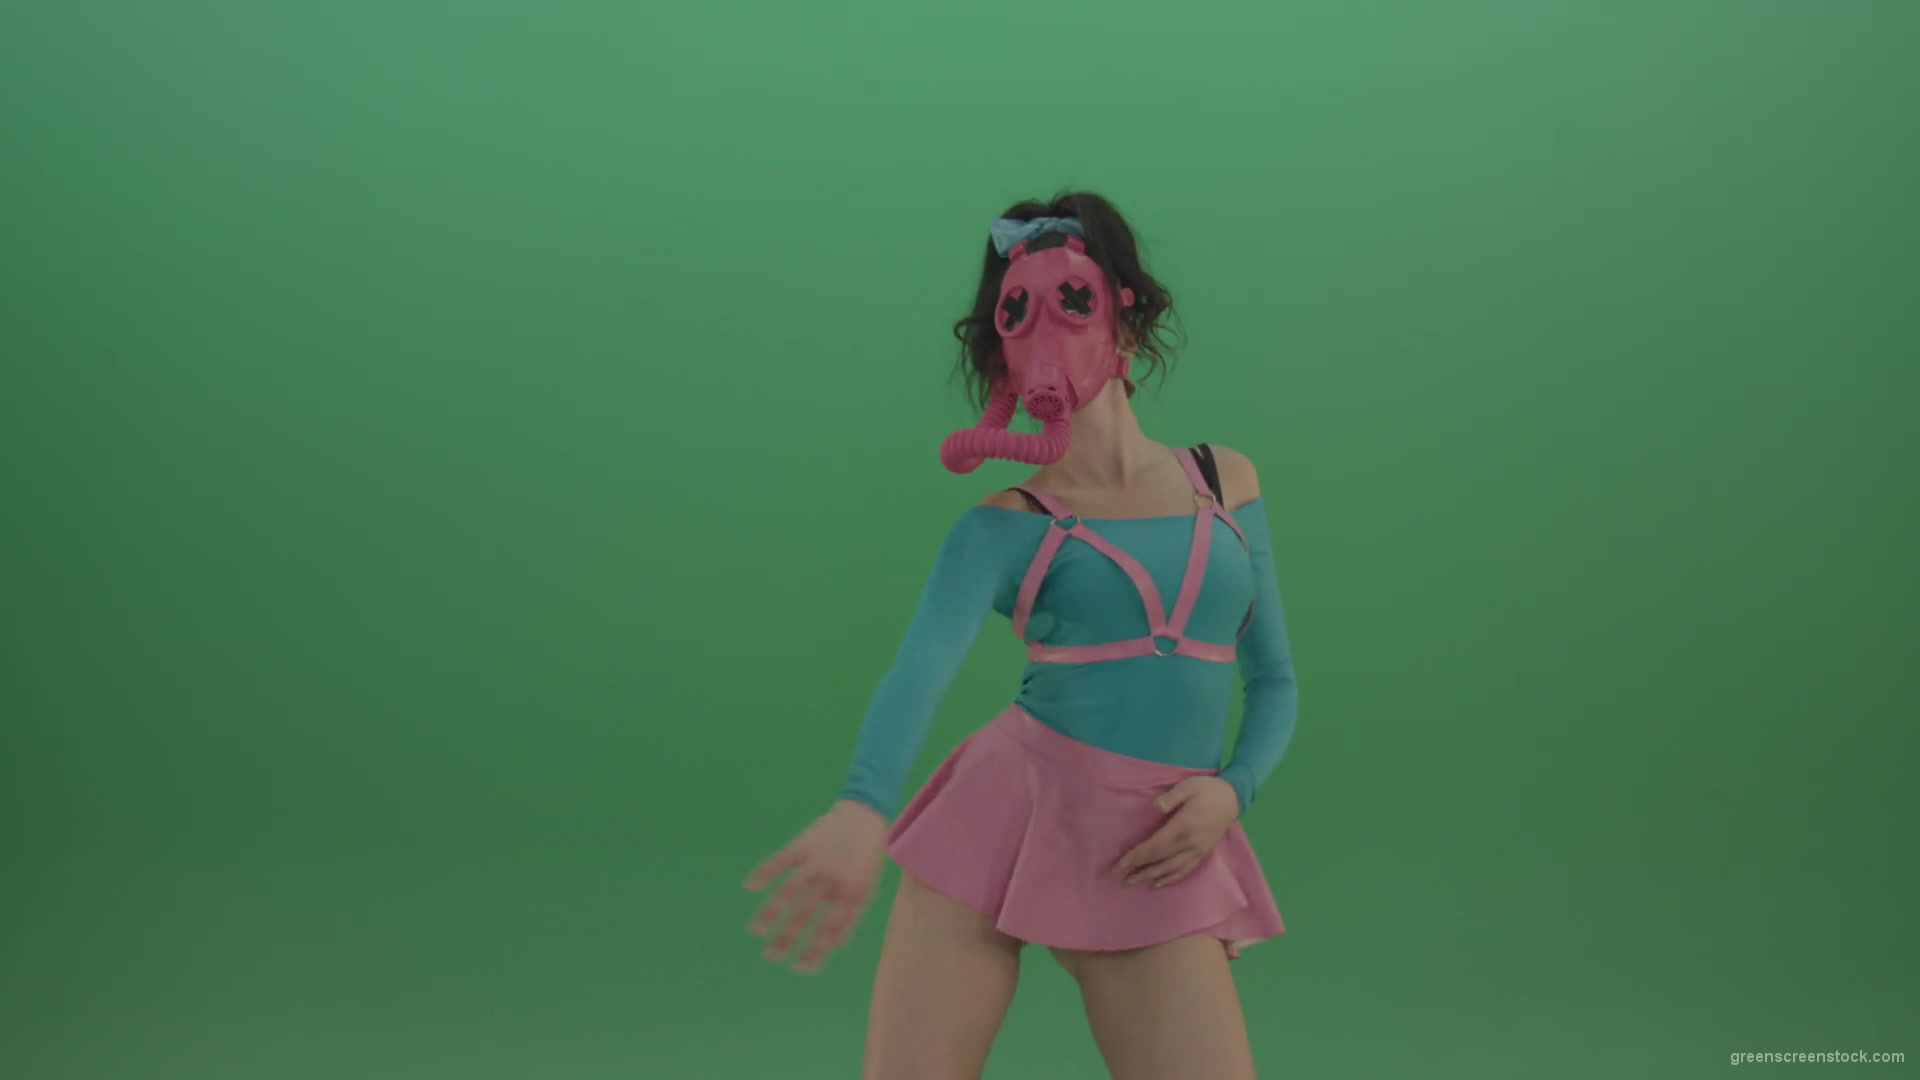 Go-Go-Dancing-Woman-in-Pink-Gas-Mask-sexy-moving-on-green-screen-4K-Video-Footage-1920_007 Green Screen Stock